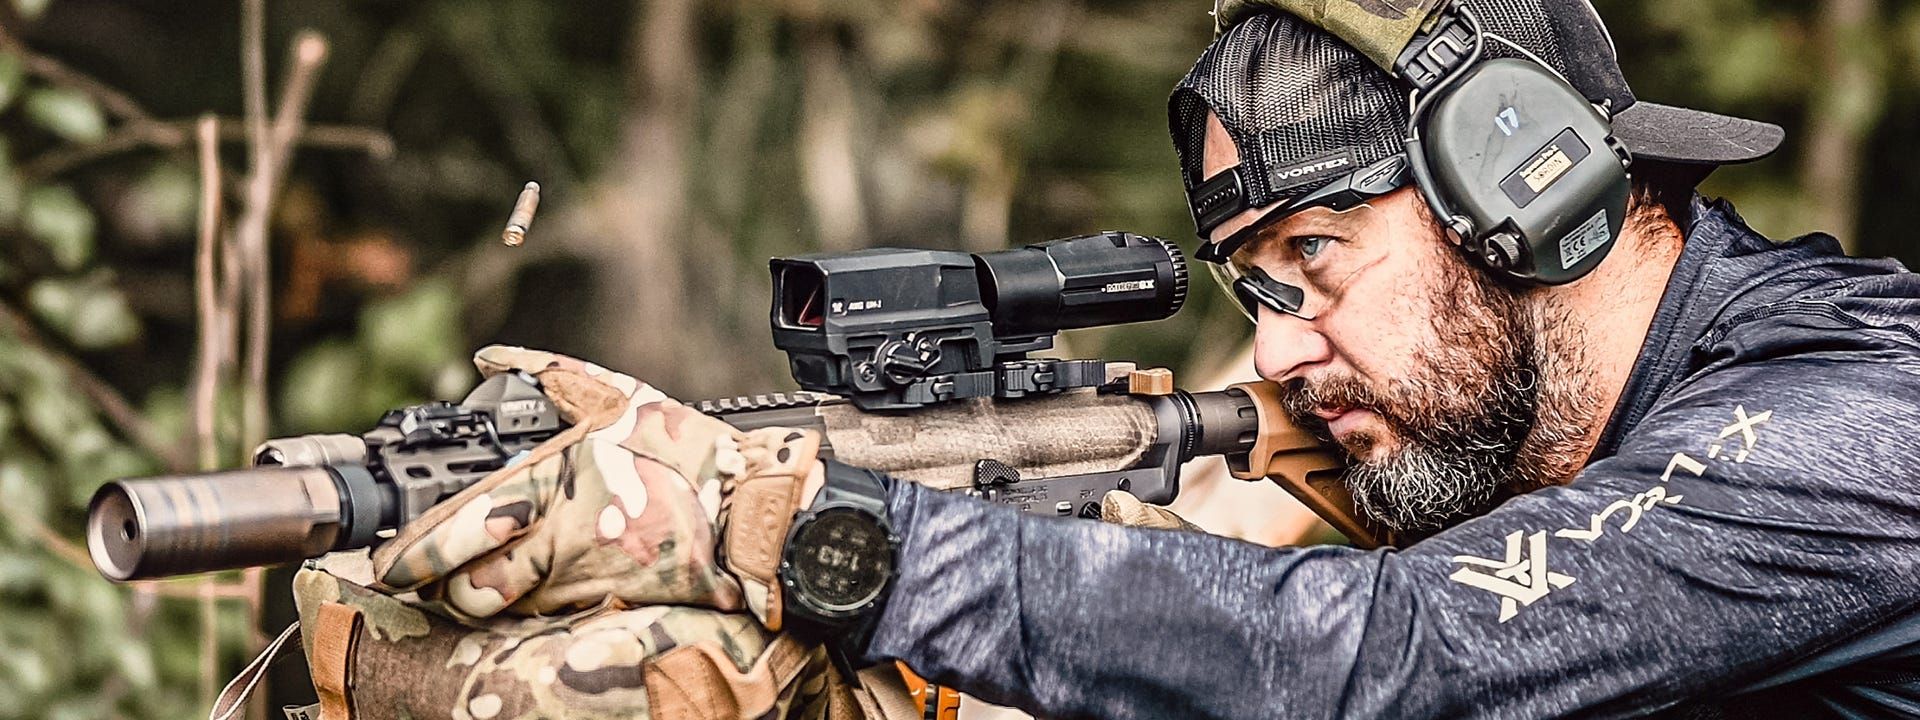 Vortex Optics Announced Micro6X Magnifier for Red Dots and Holographic Sights